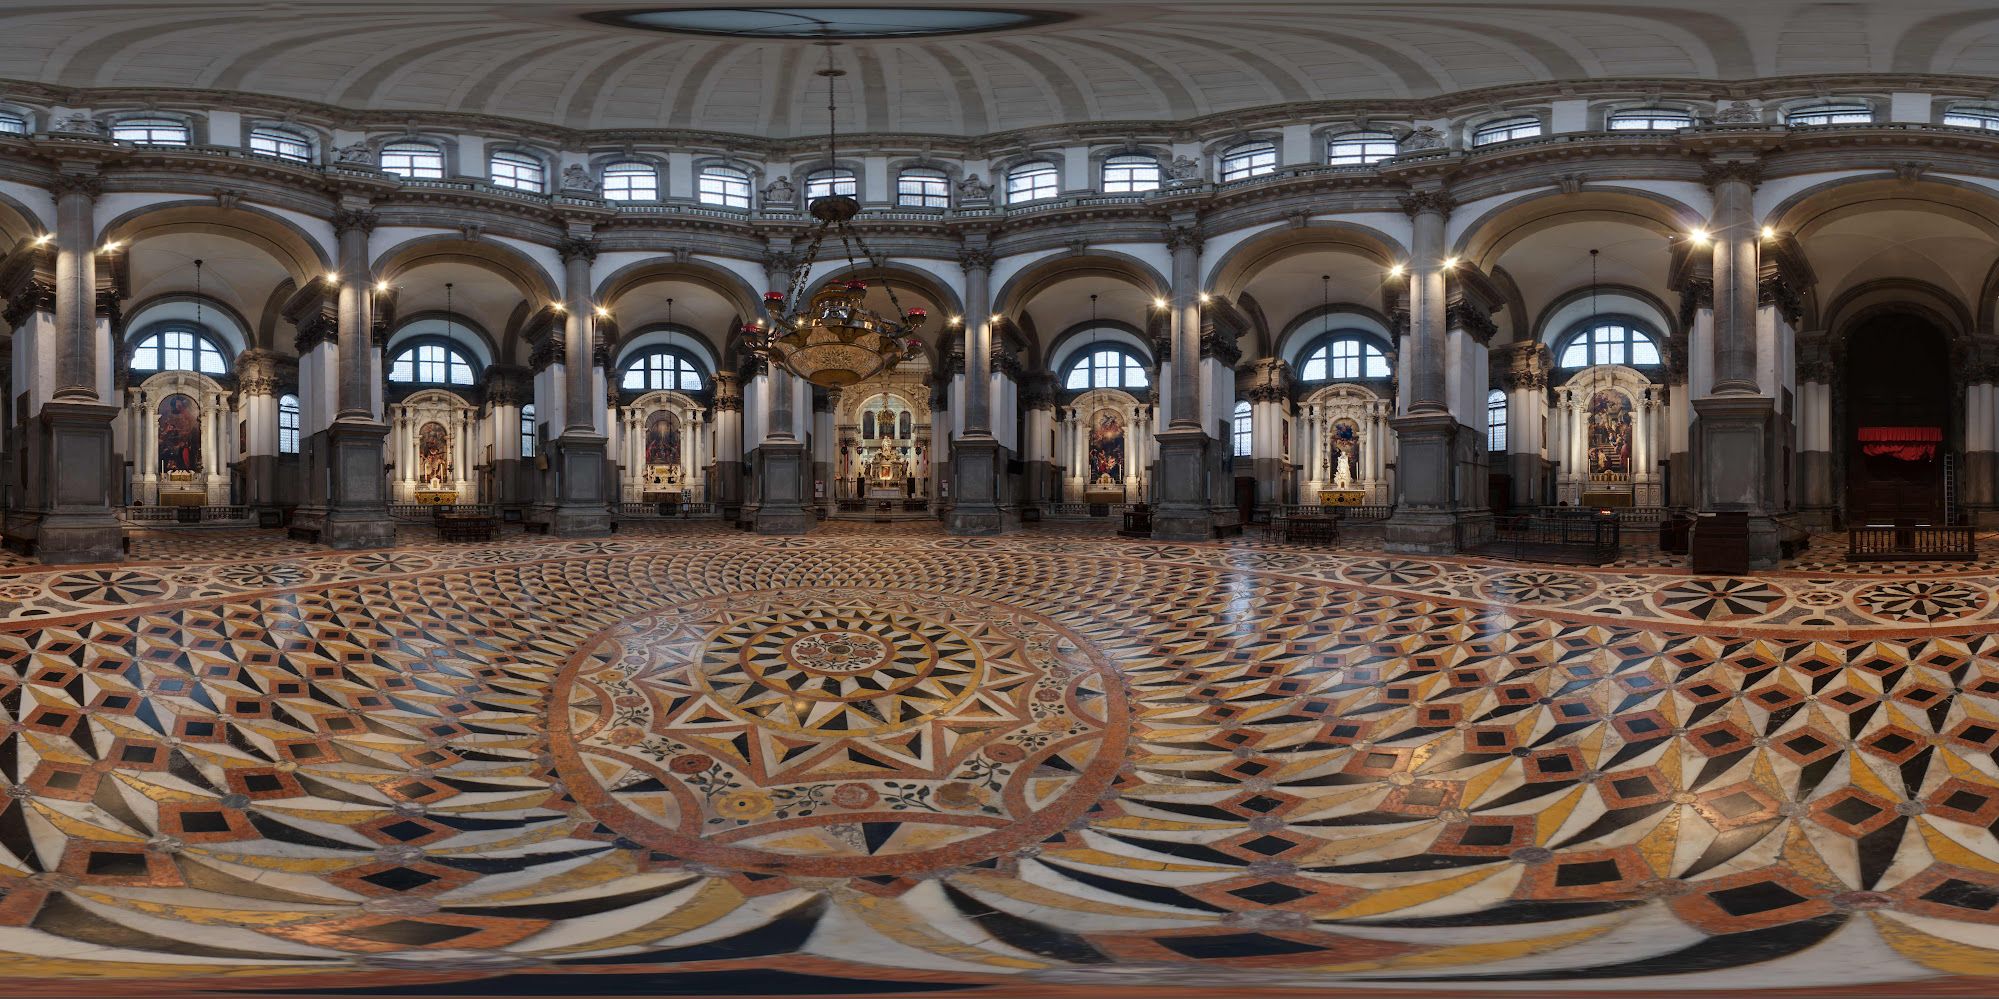 Basilica interior with decorative floor patterns and person standing with balloon on opposite side with microphone on the other side in between pillars and archways